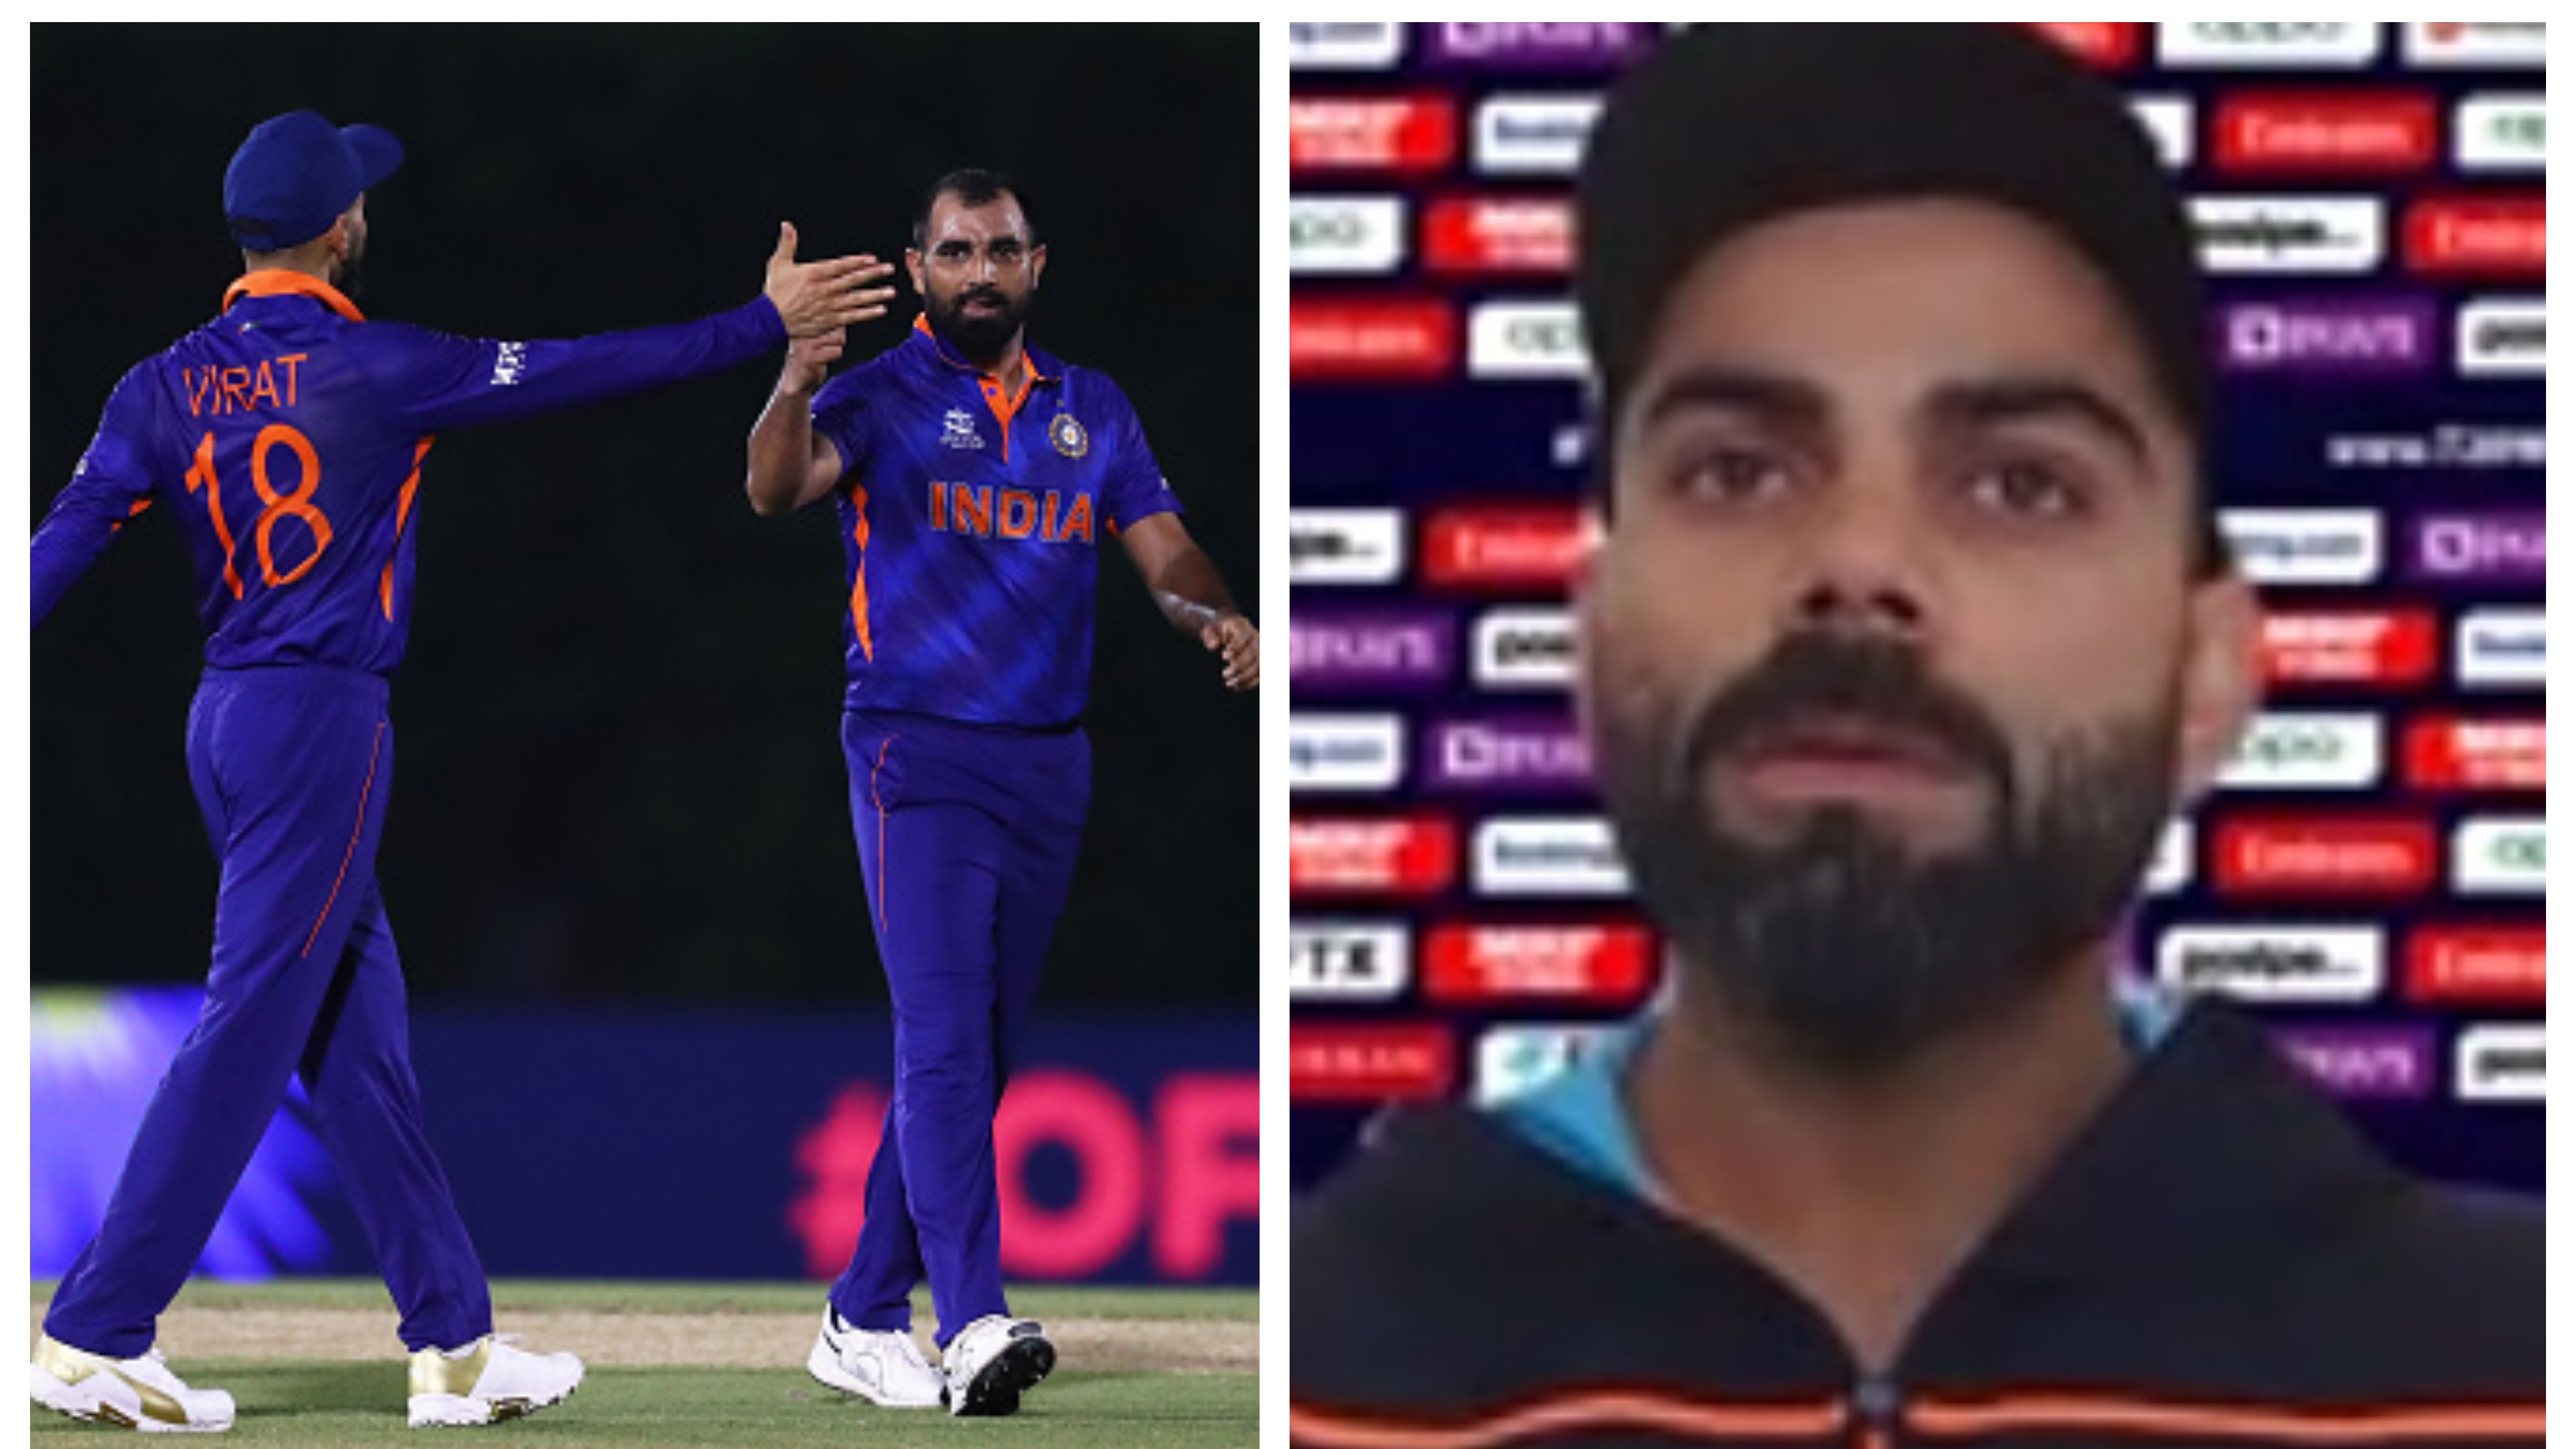 T20 World Cup 2021: ‘Our brotherhood cannot be shaken’, Kohli slams “spineless people” for abusing Shami